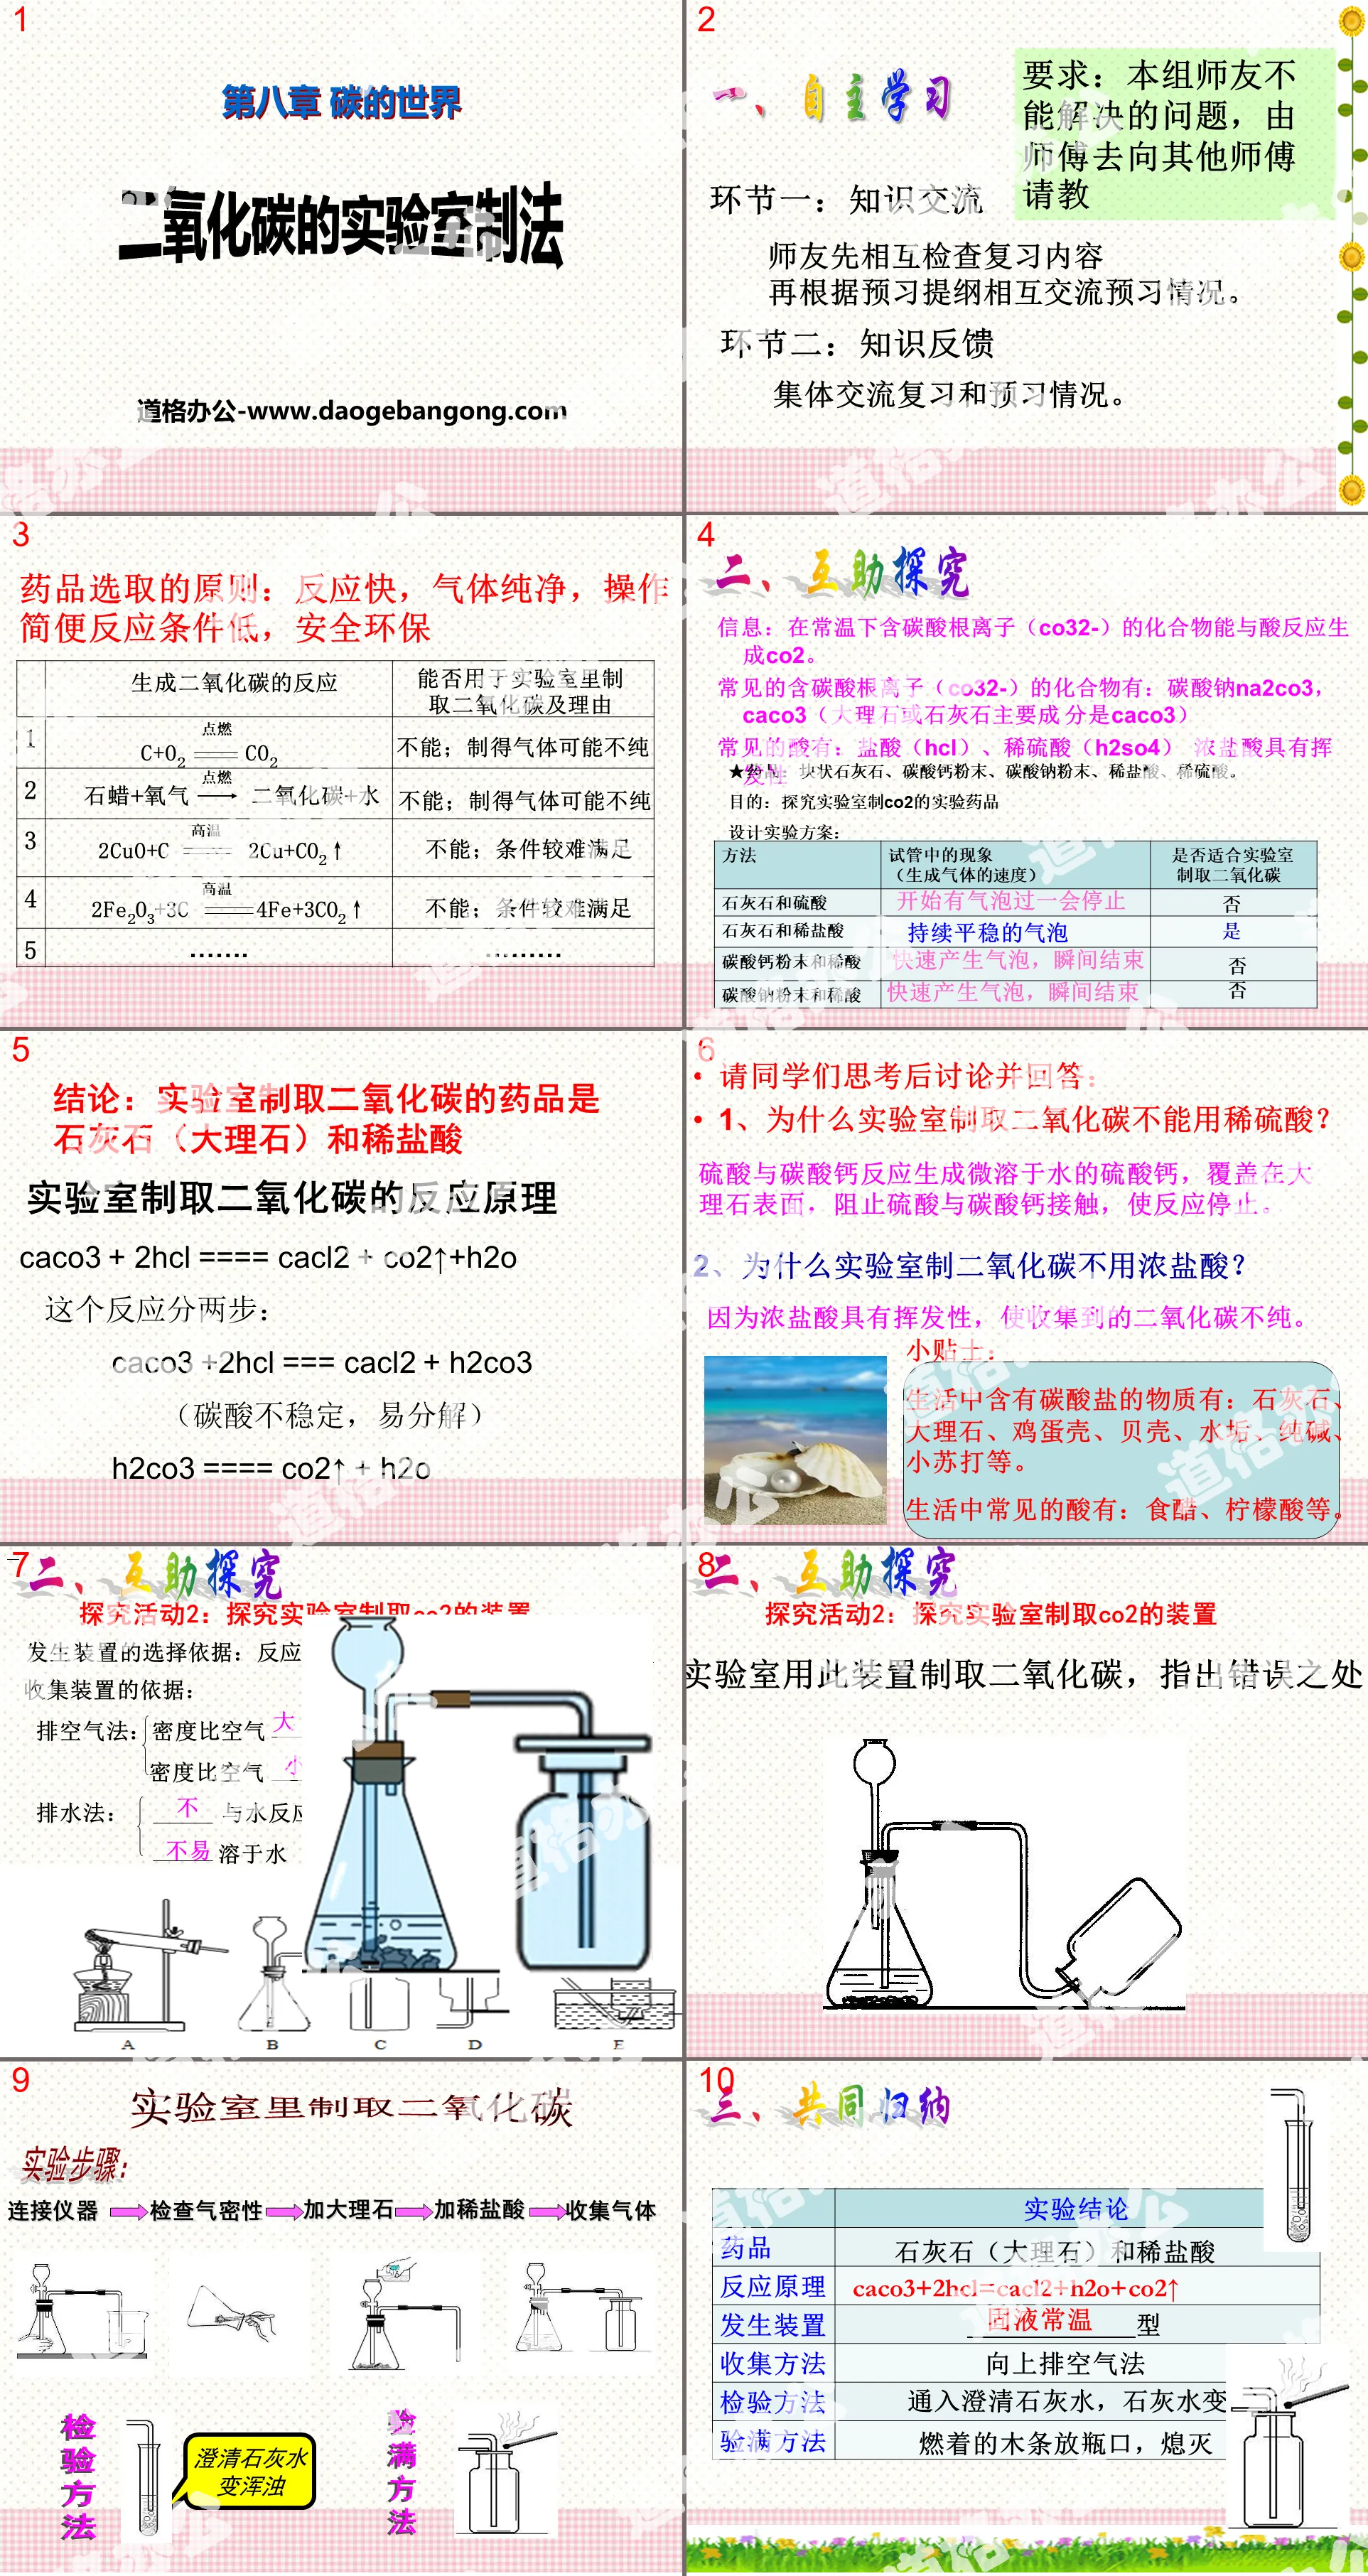 "Laboratory Production Method of Carbon Dioxide" The World of Carbon PPT Courseware